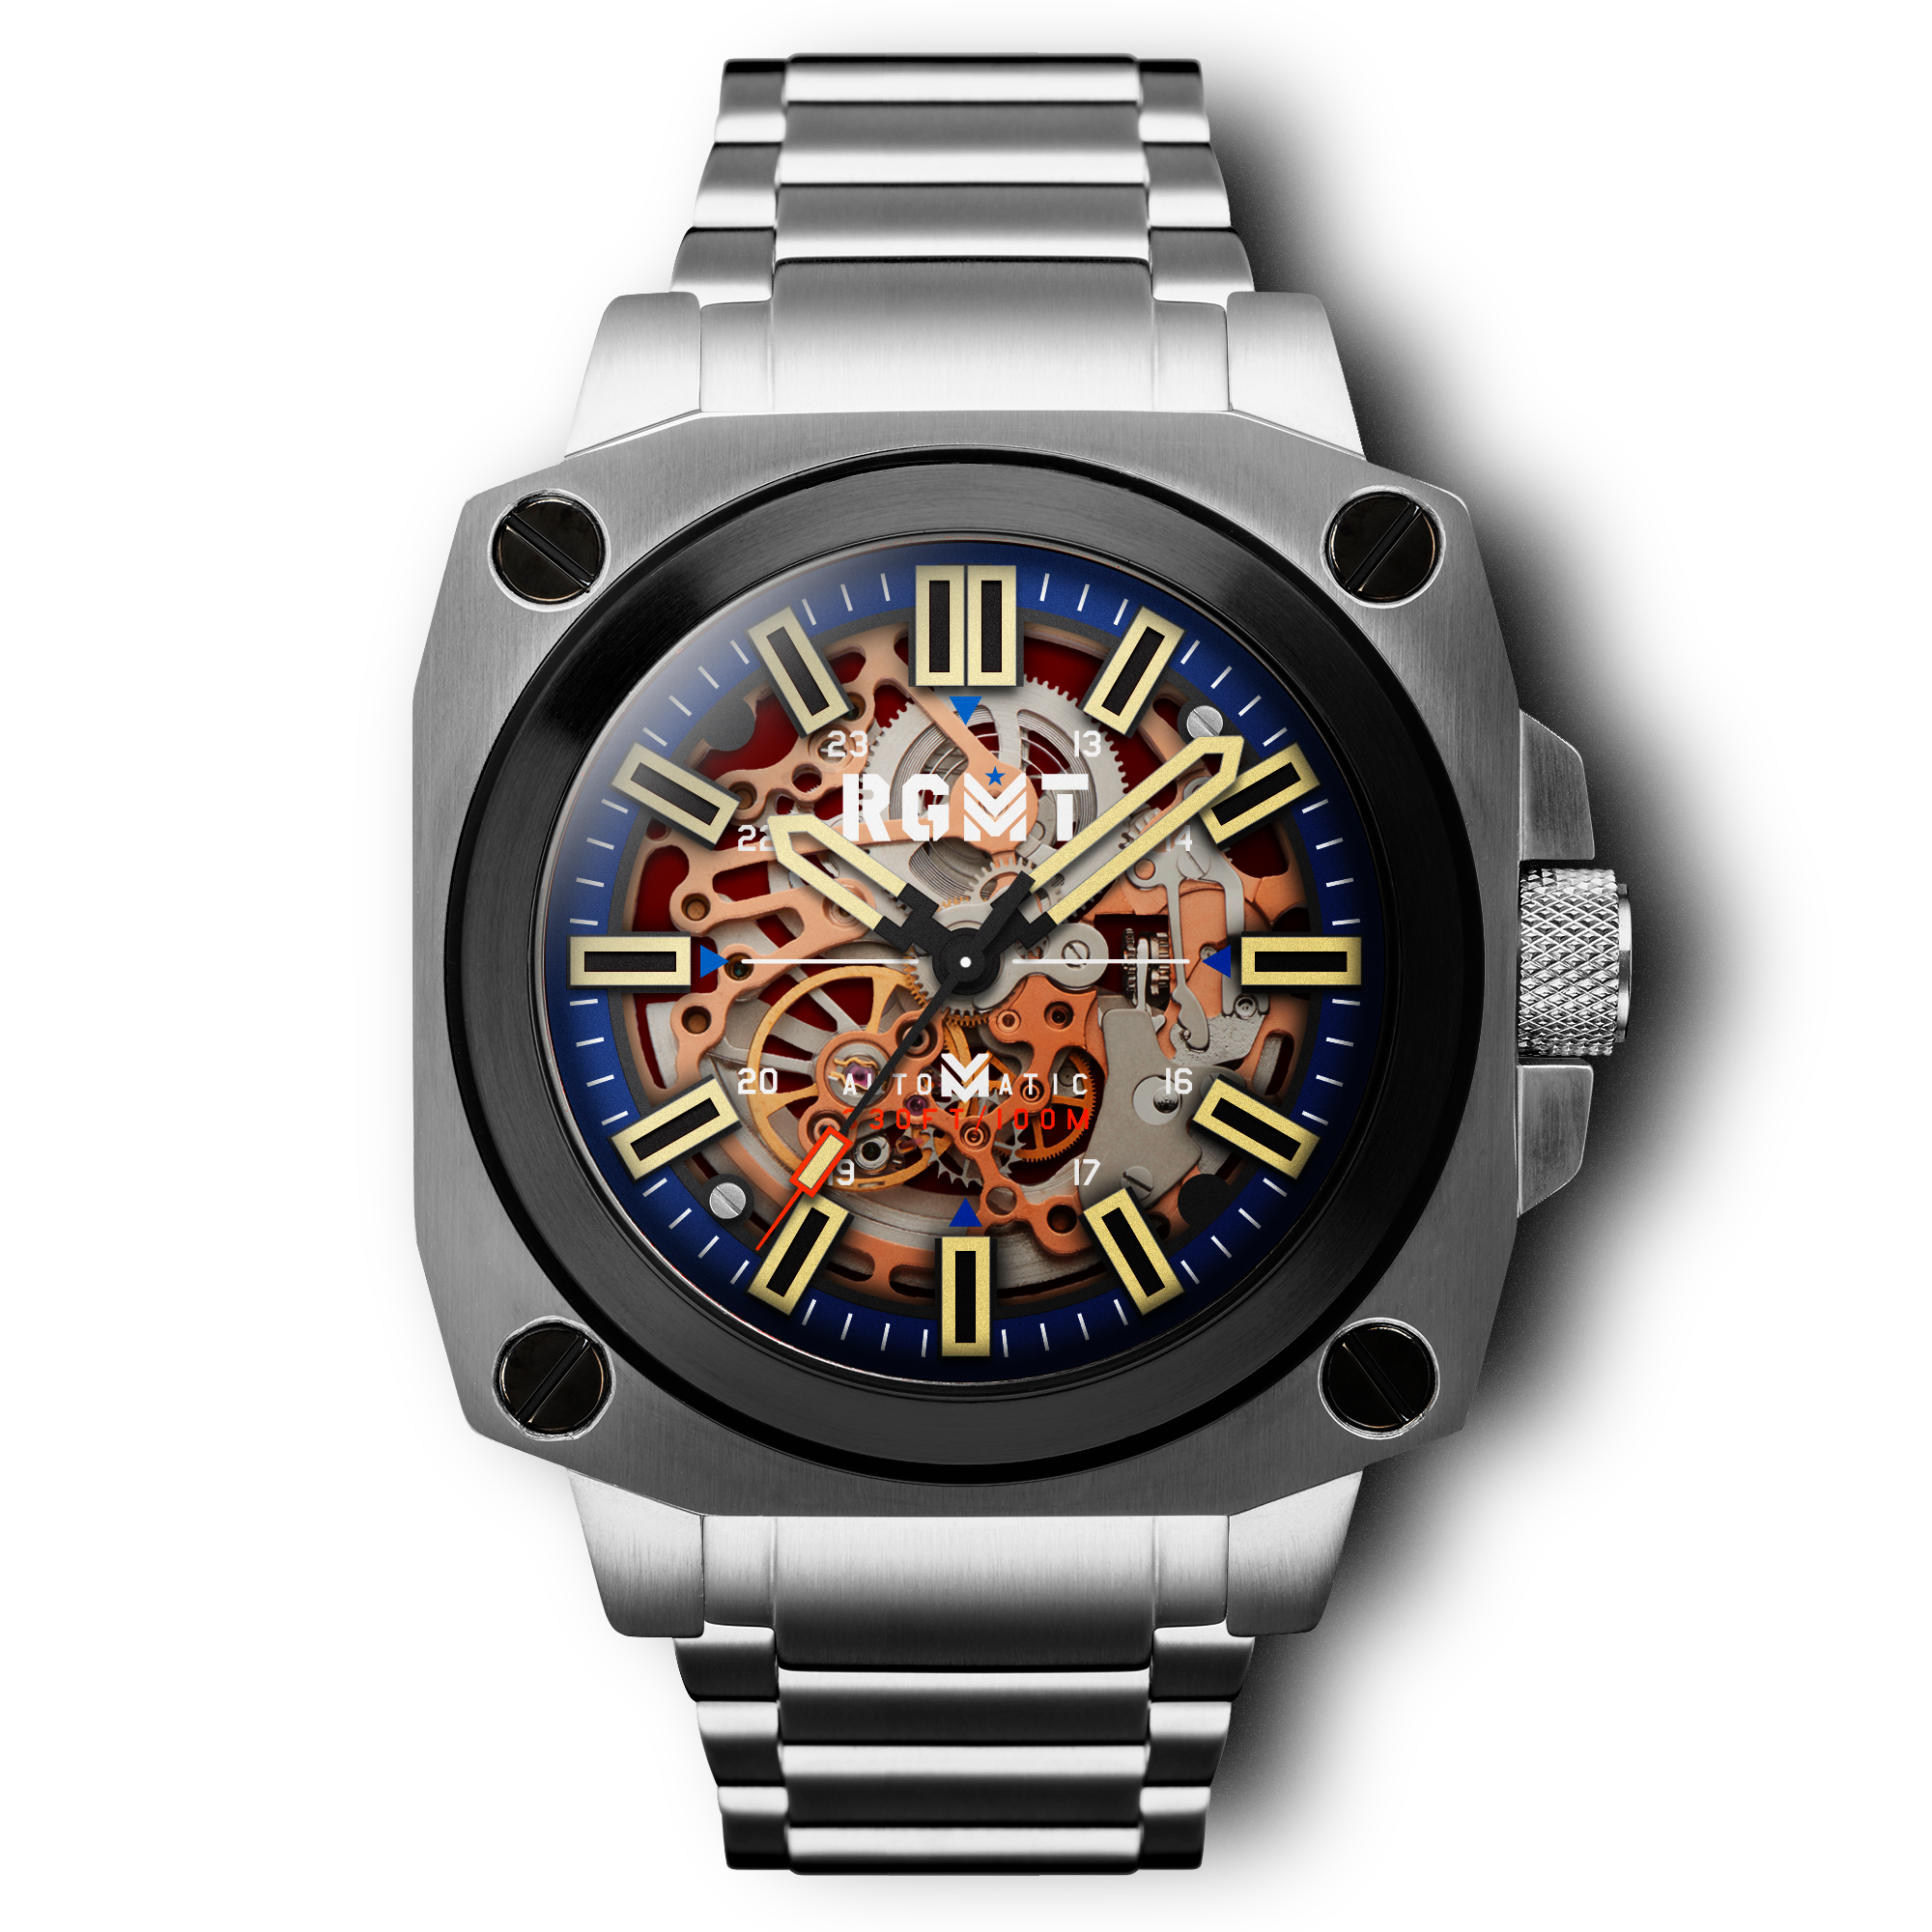 Digital Sports Military Apache Watches for Men – CakCity Watches